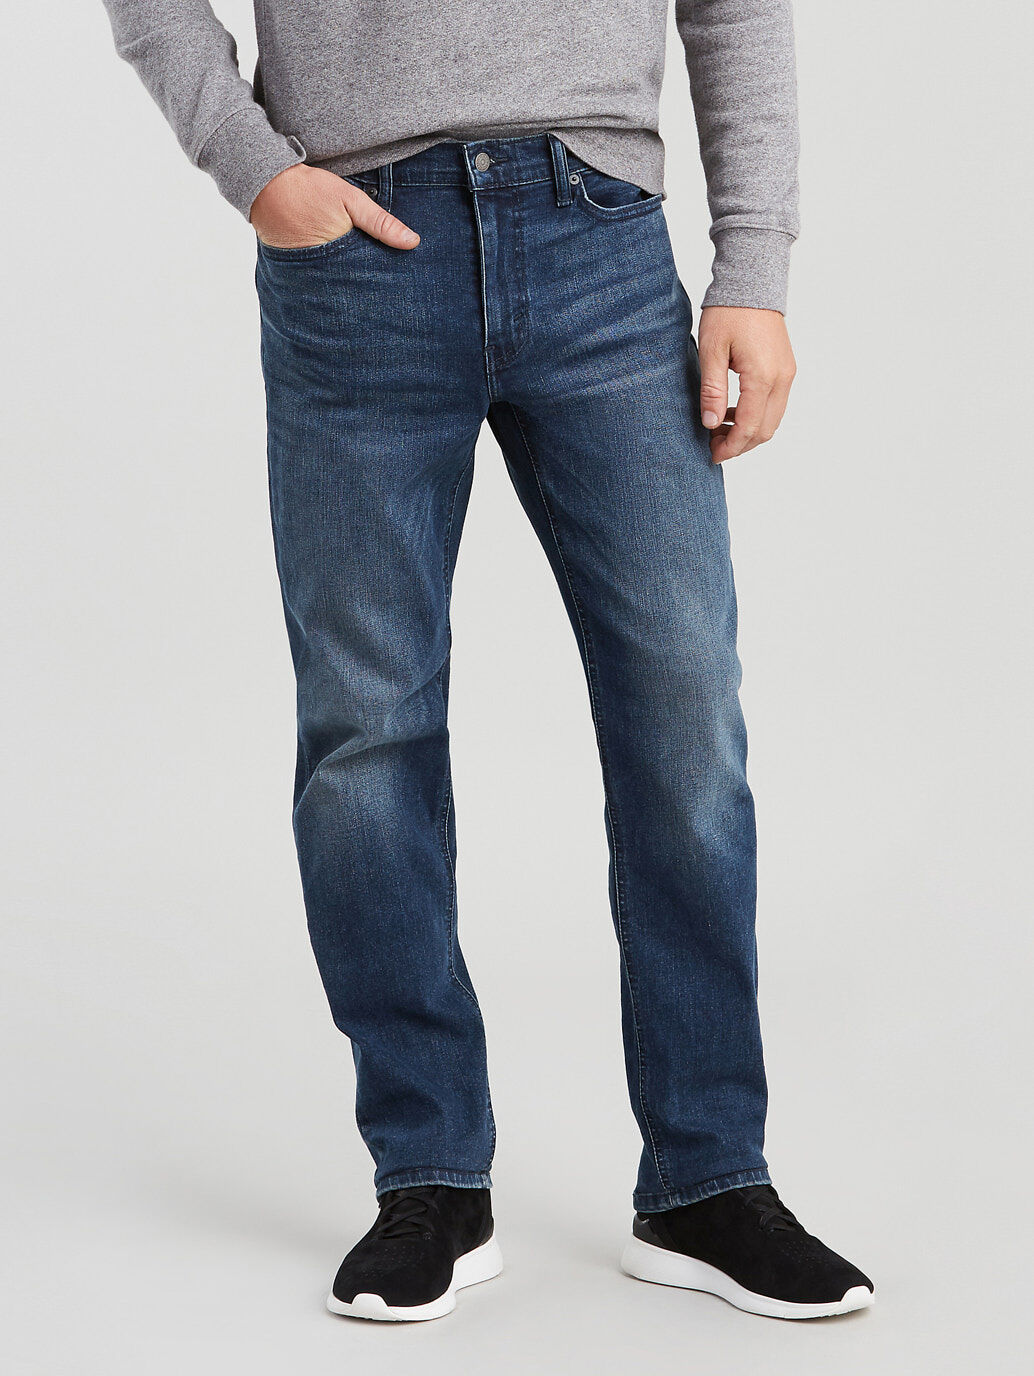 541™ Athletic Taper Jeans